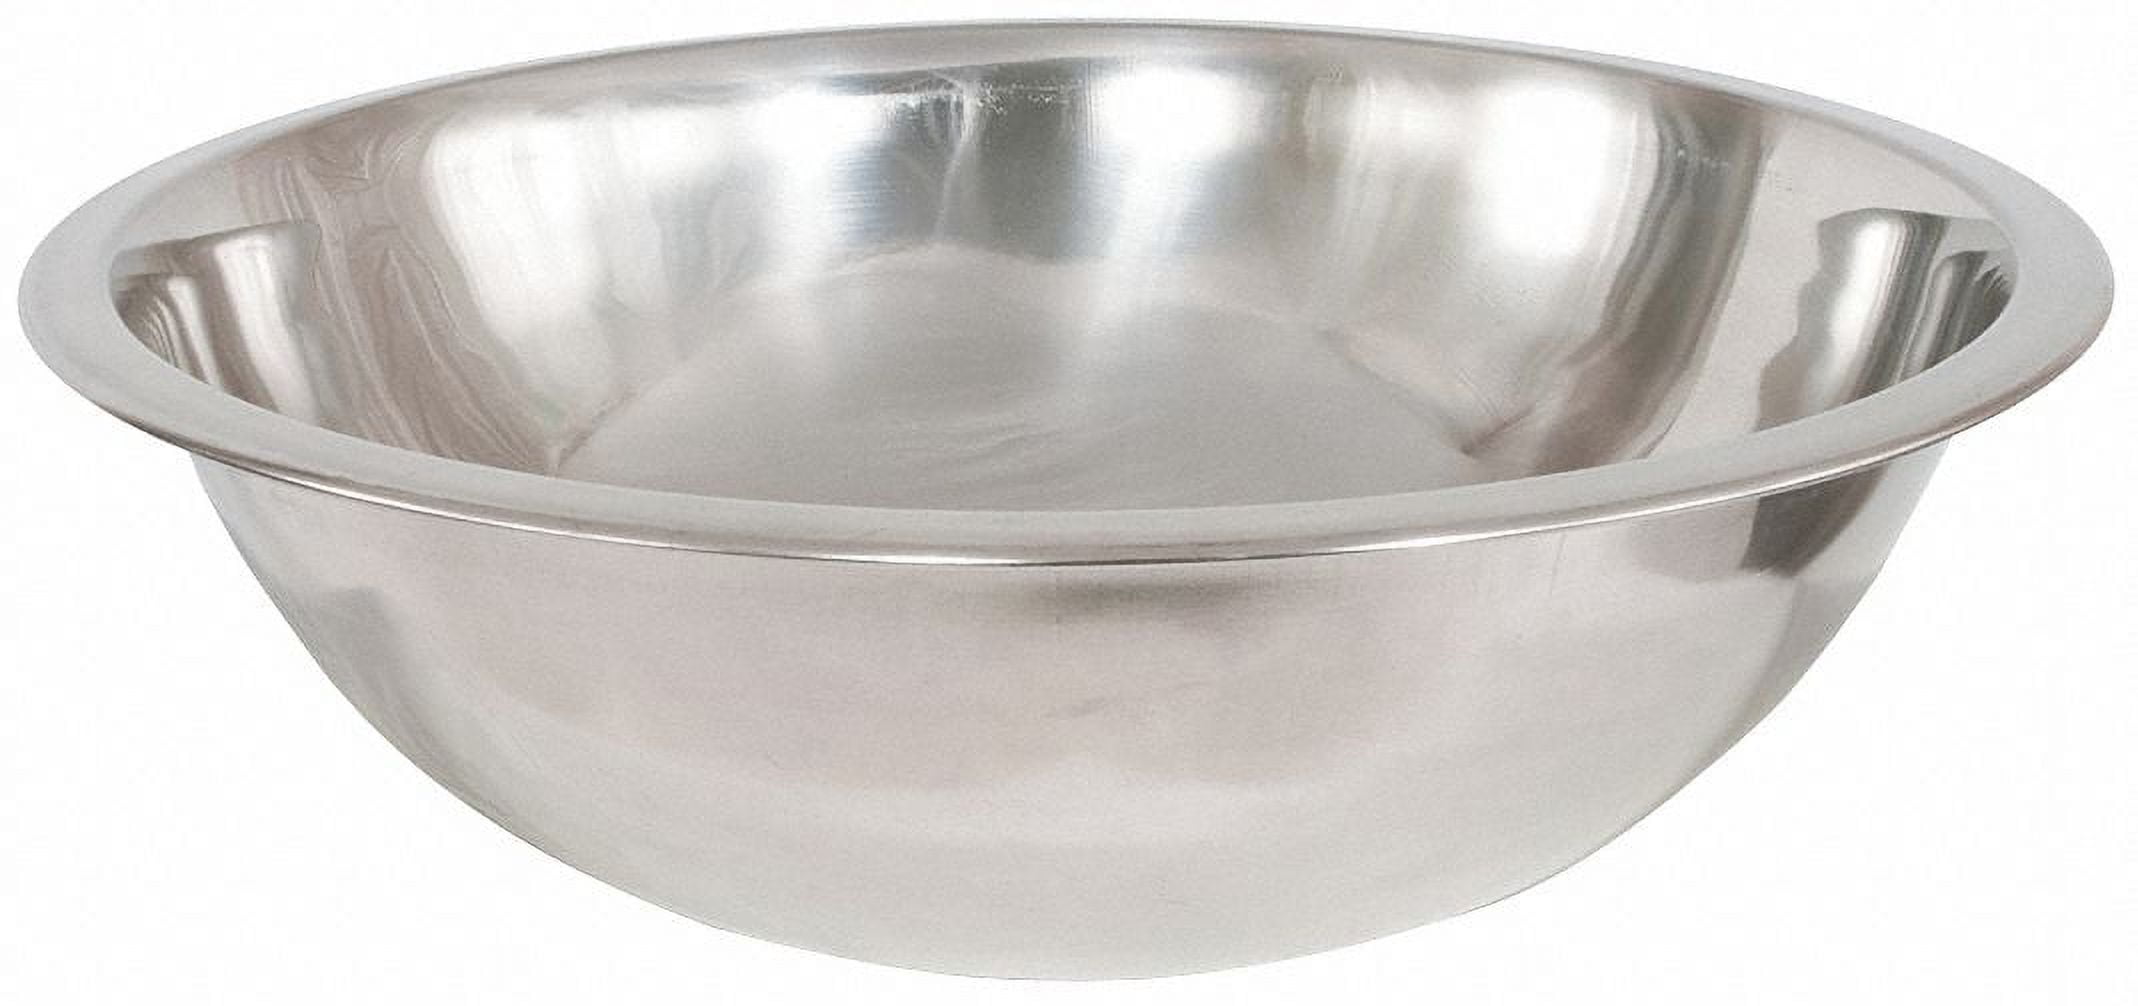 McSunley 5 qt. Stainless Steel Mixing Bowl 719